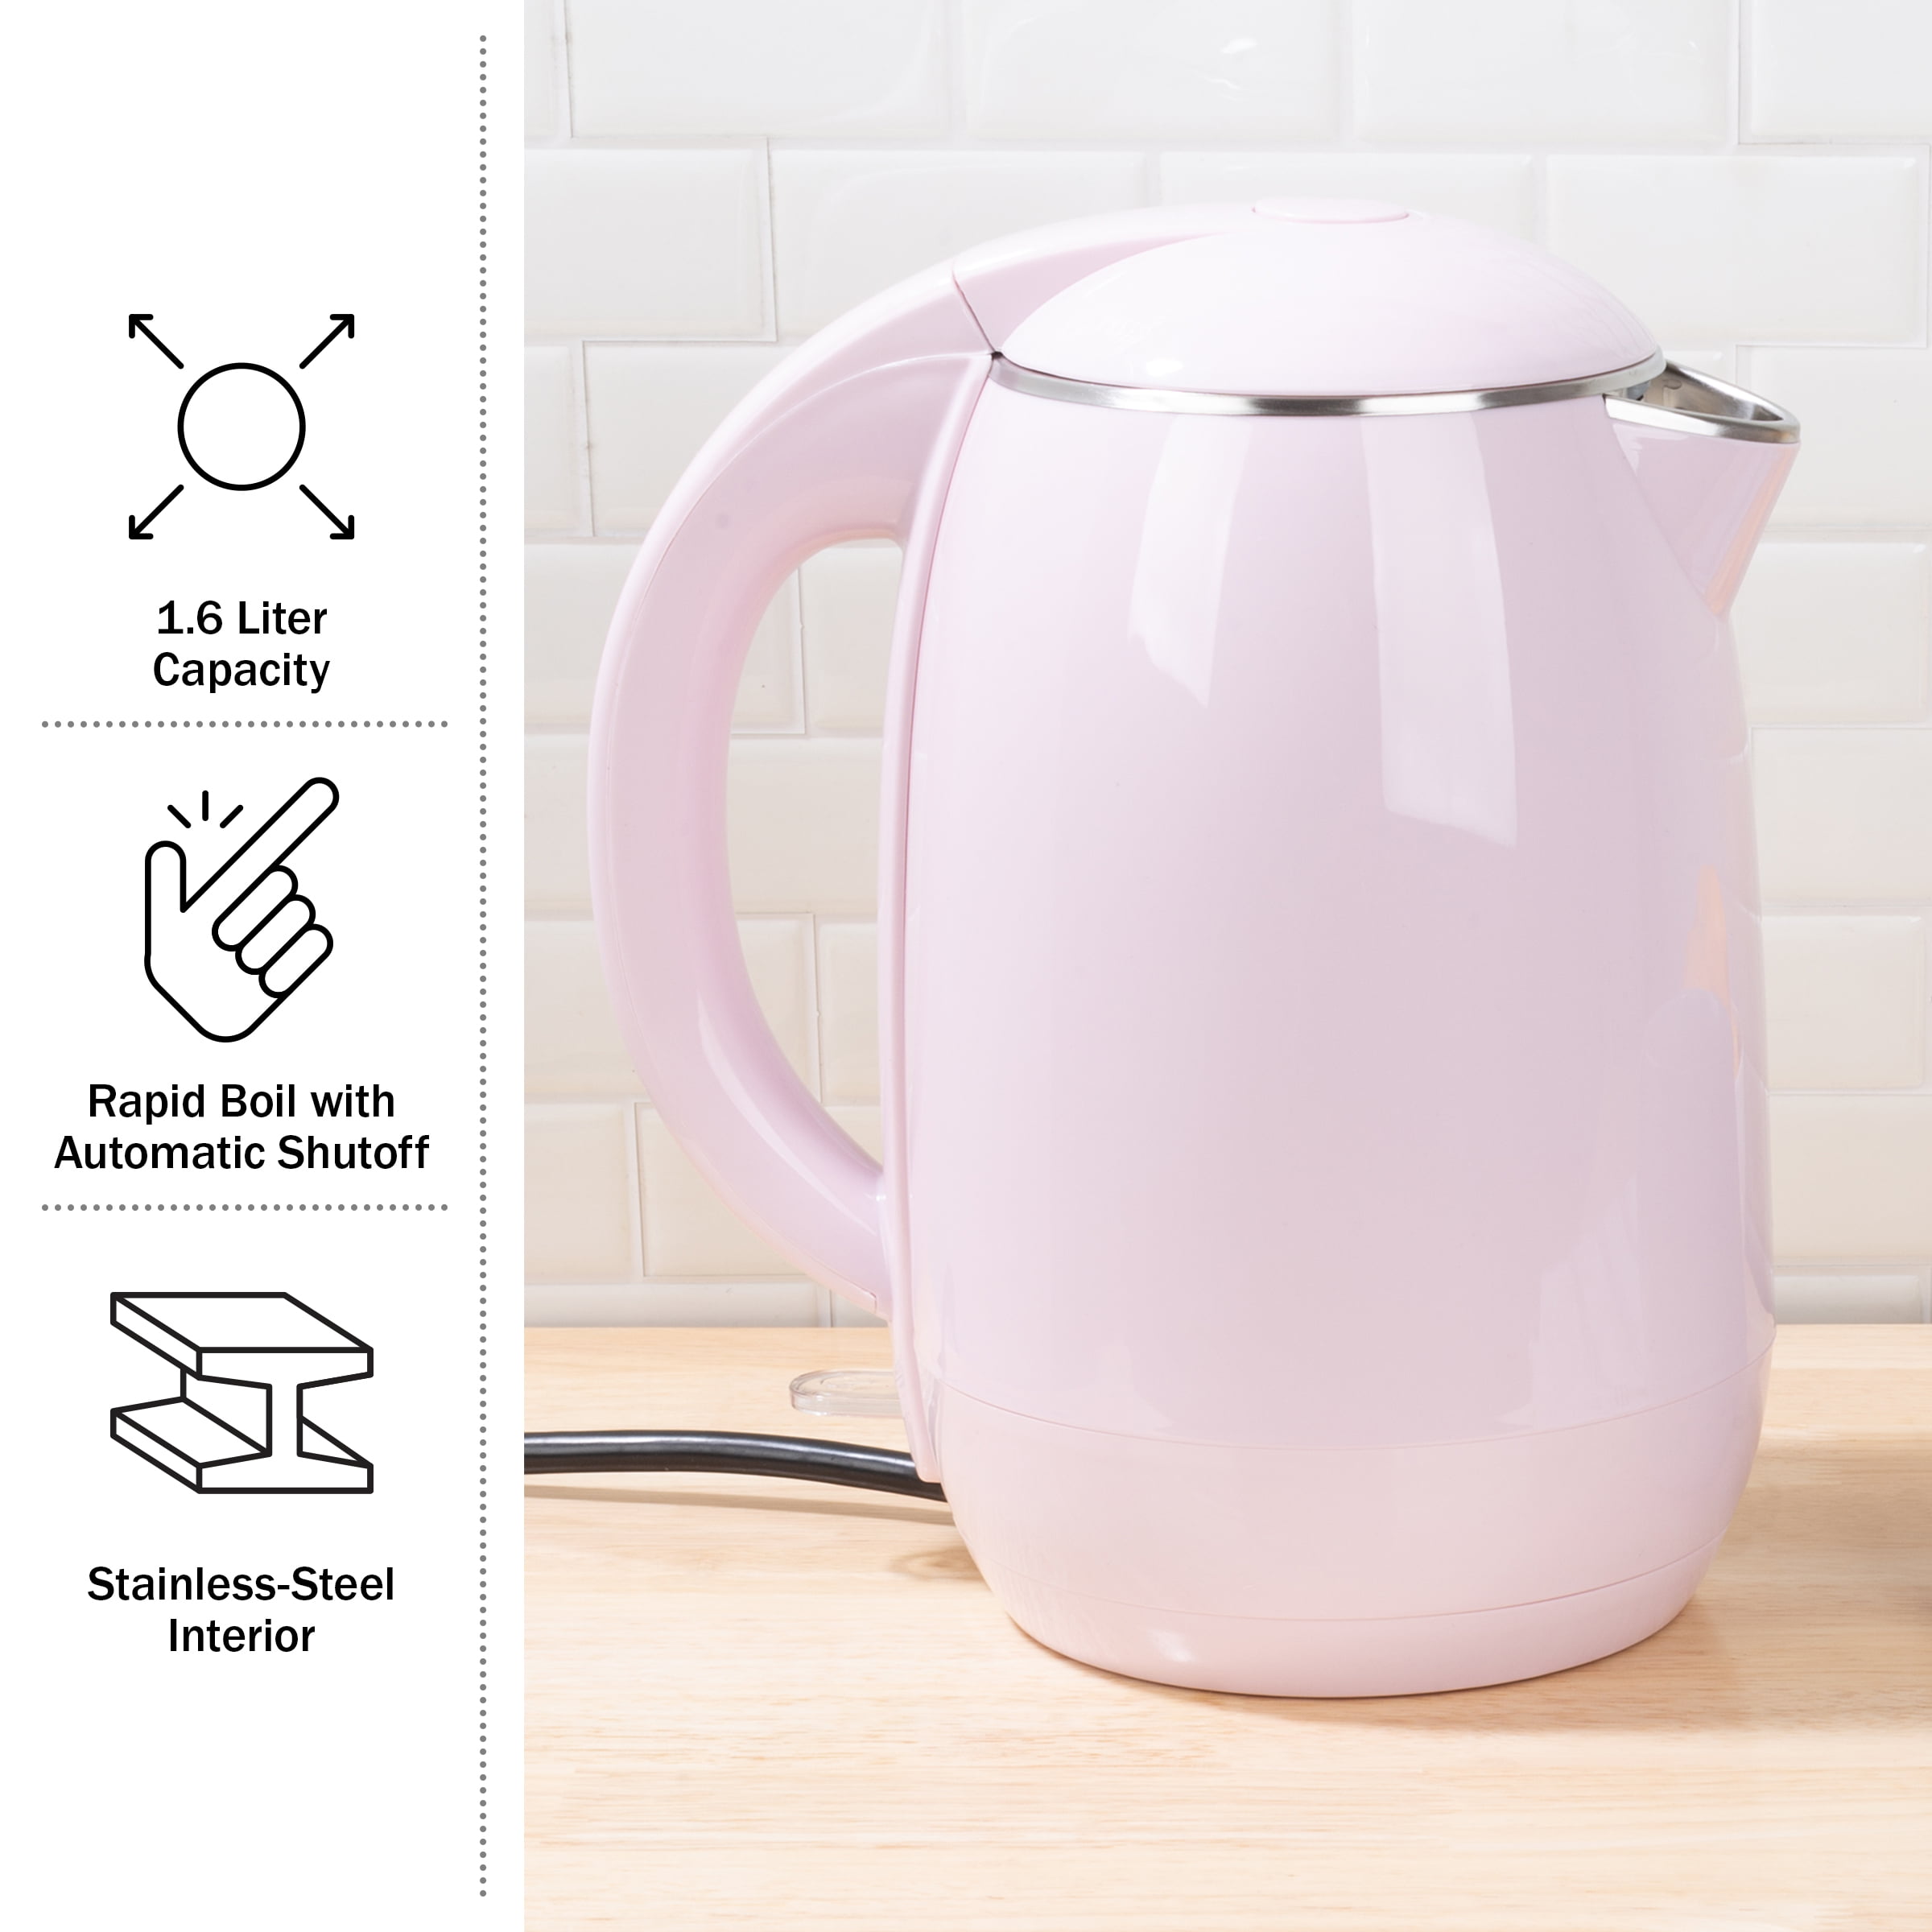 This Mueller electric kettle makes water boil fast! #musthaves , Gadgets Kitchen